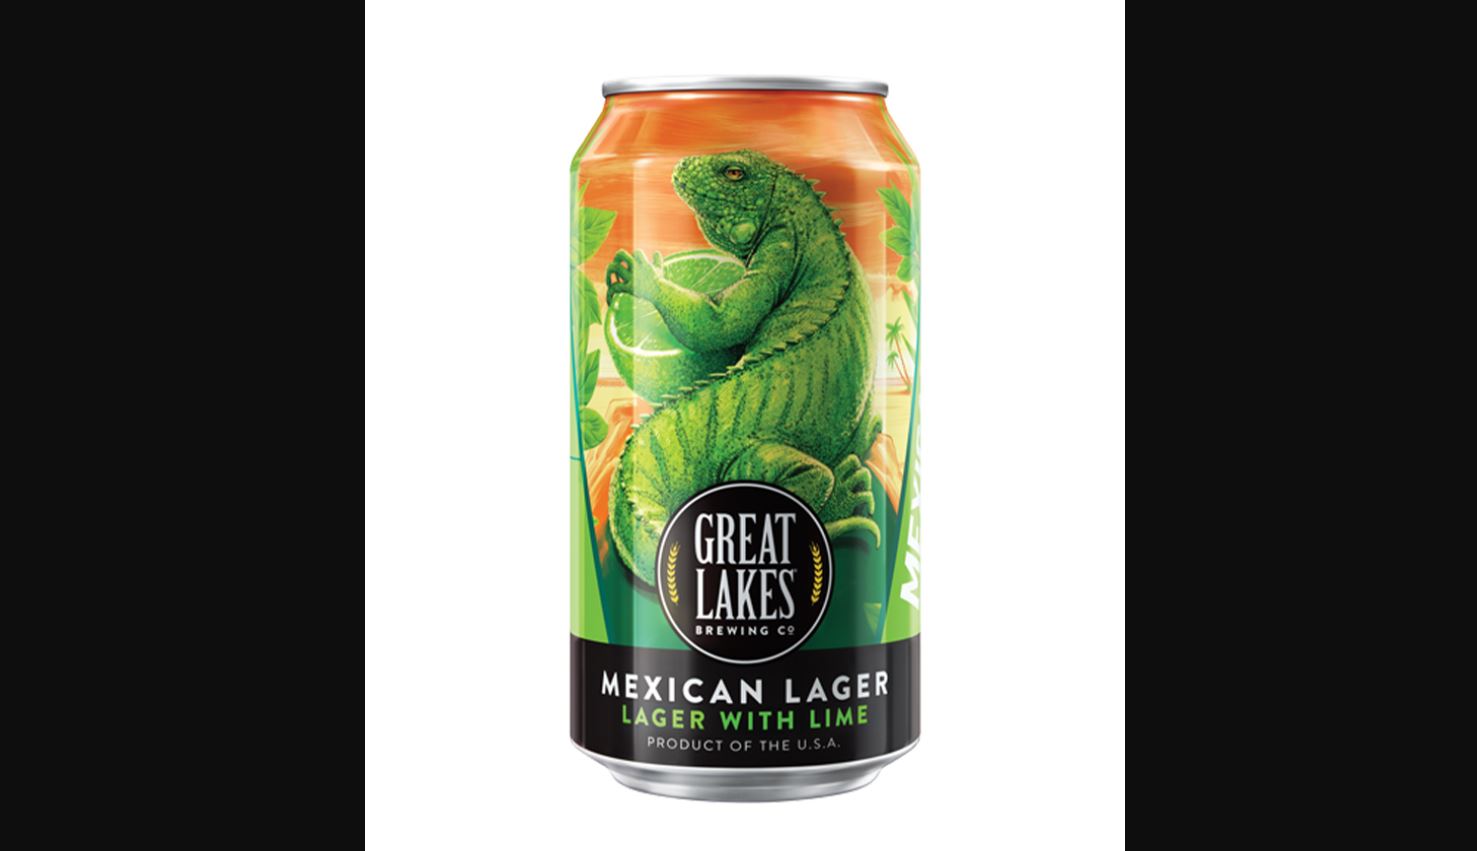 Great Lakes Mexican Lager With Lime